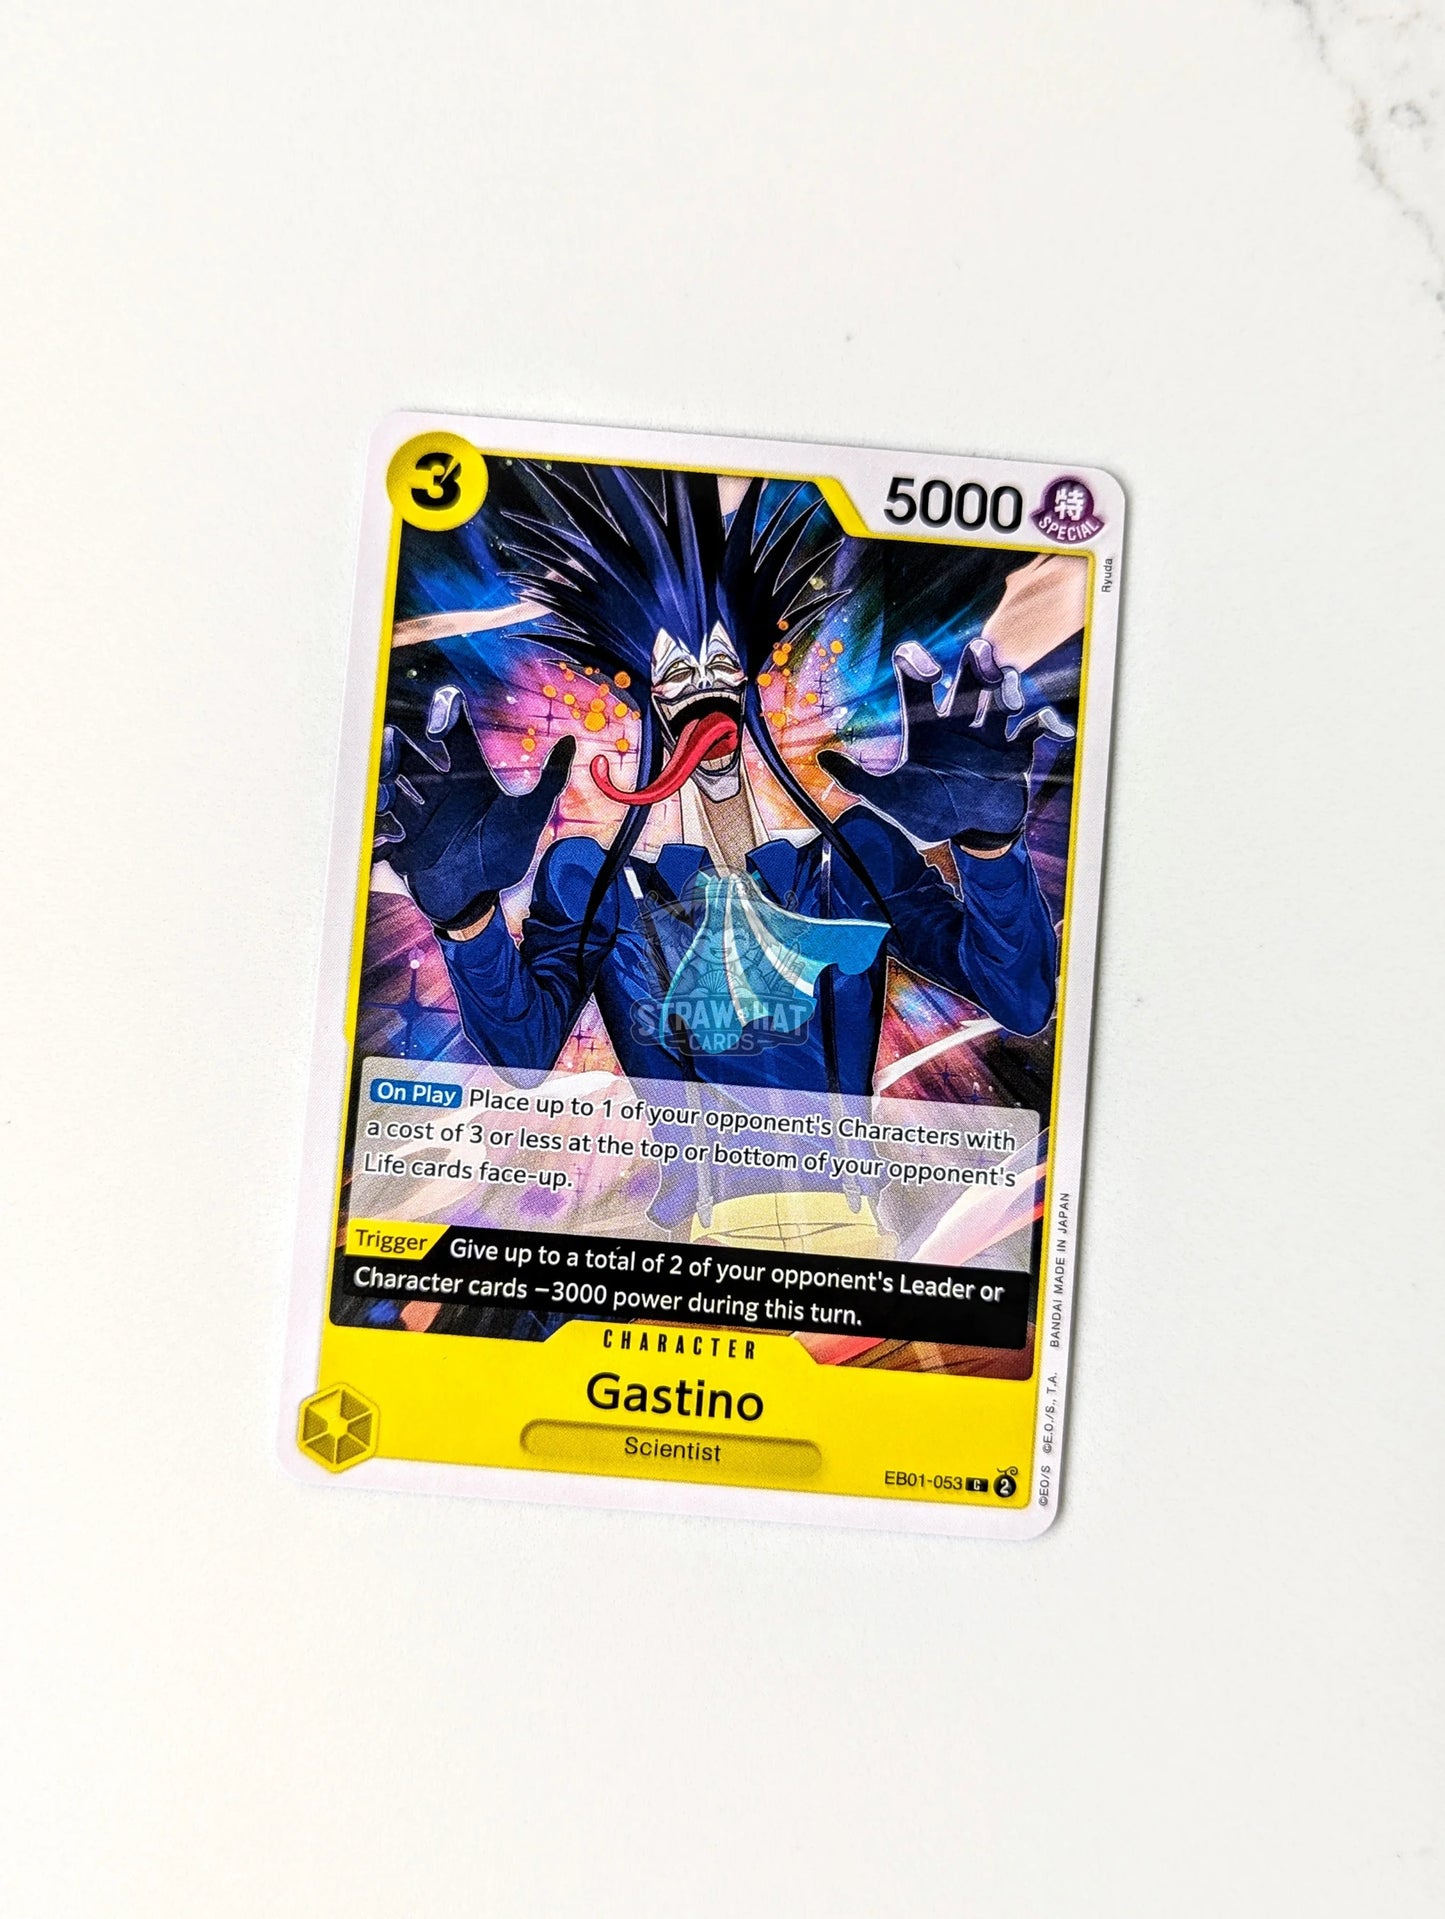 One Piece Eb01 Memorial Collection Gastino Eb01-053 C Card [Eng 🏴󠁧󠁢󠁥󠁮󠁧󠁿] Trading Card